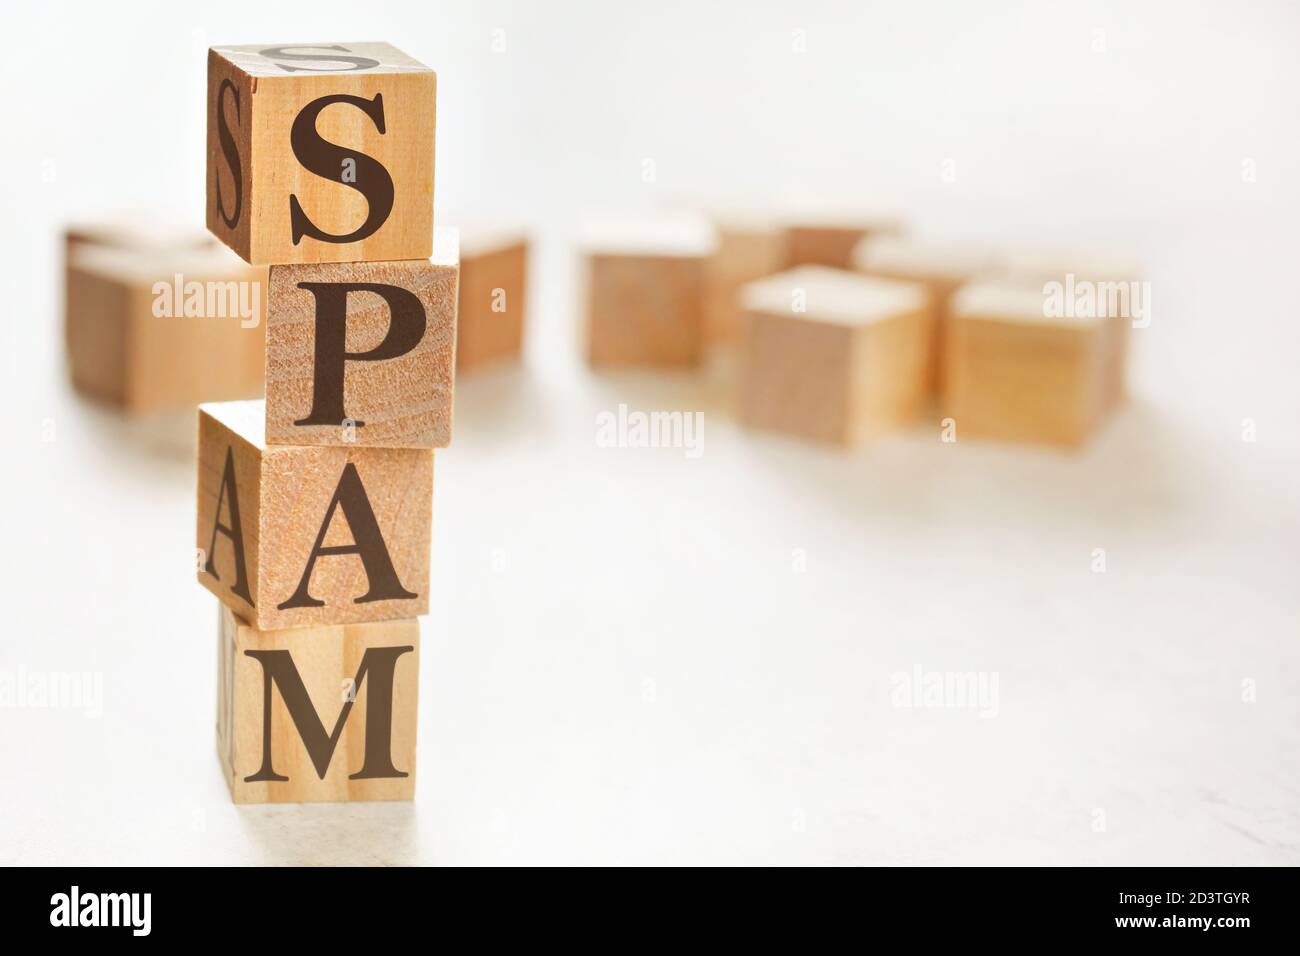 Four wooden cubes arranged in stack with word SPAM on them, space for text / image at down right corner Stock Photo